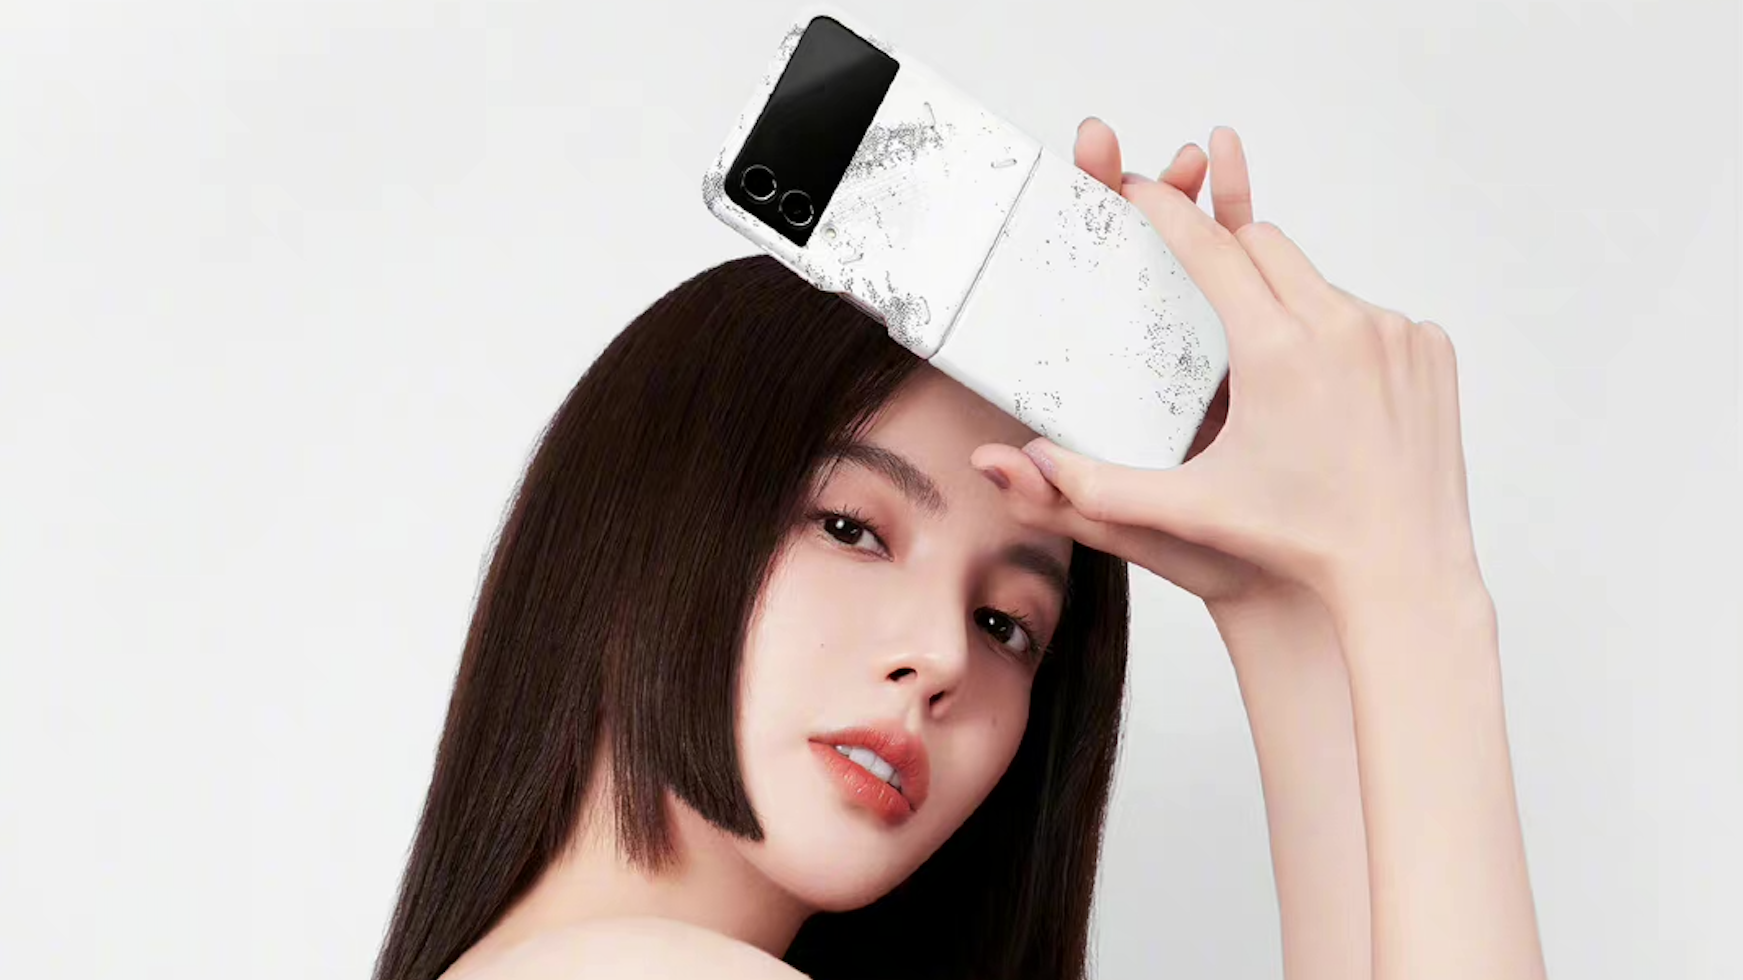 Mobile smartphone companies are partnering up with luxury brands and artists to release ever more attractive offerings for China’s youth. Who does it best? Image: Weibo